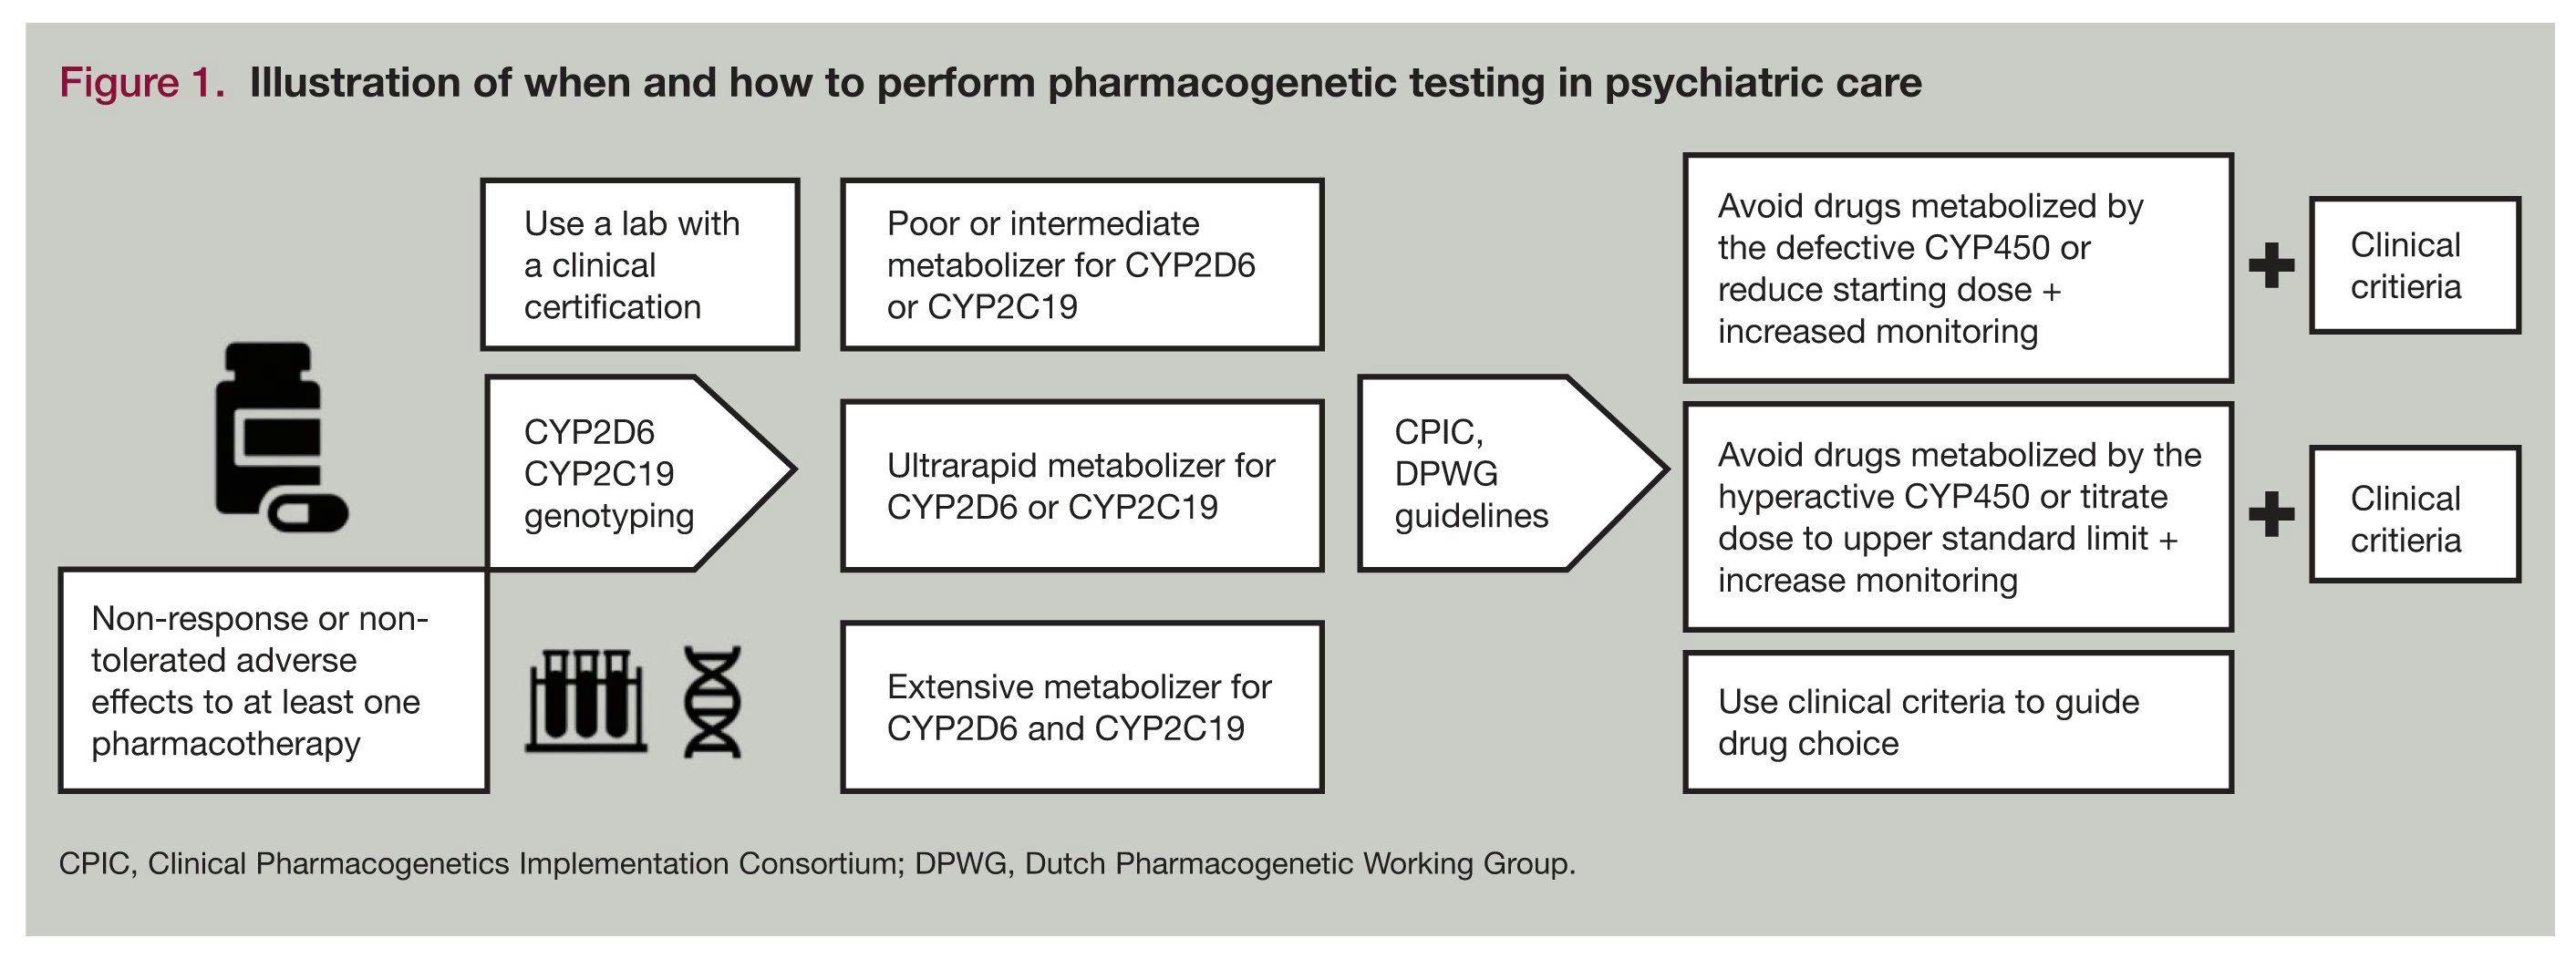 when and how to perform pharmacogenetic testing in psychiatric care